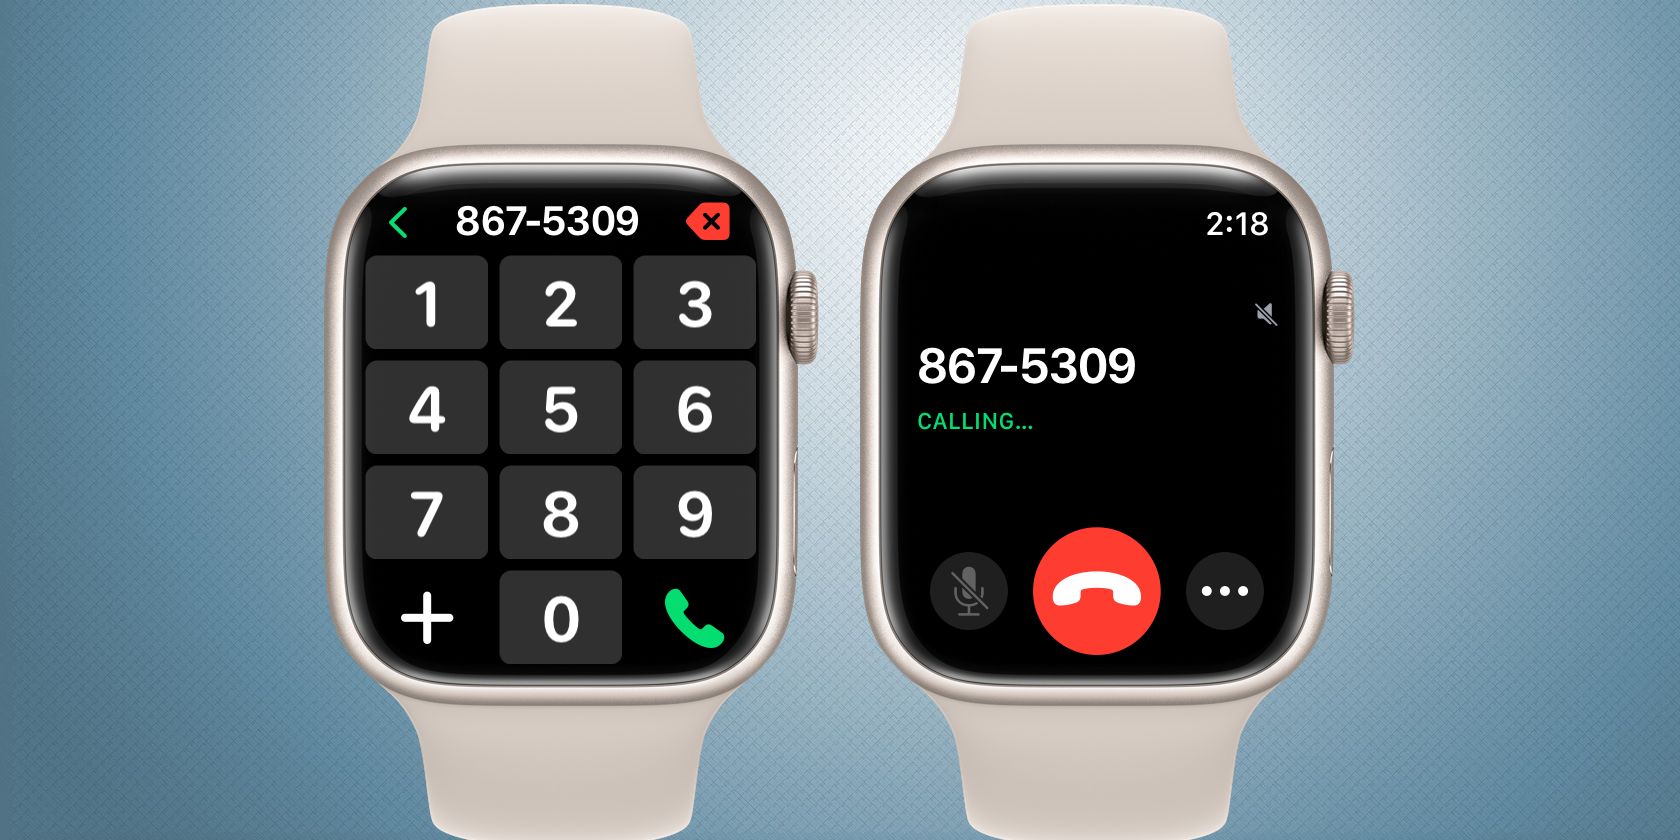 Will the Apple Watch call 911 if your heart stops? - Quora